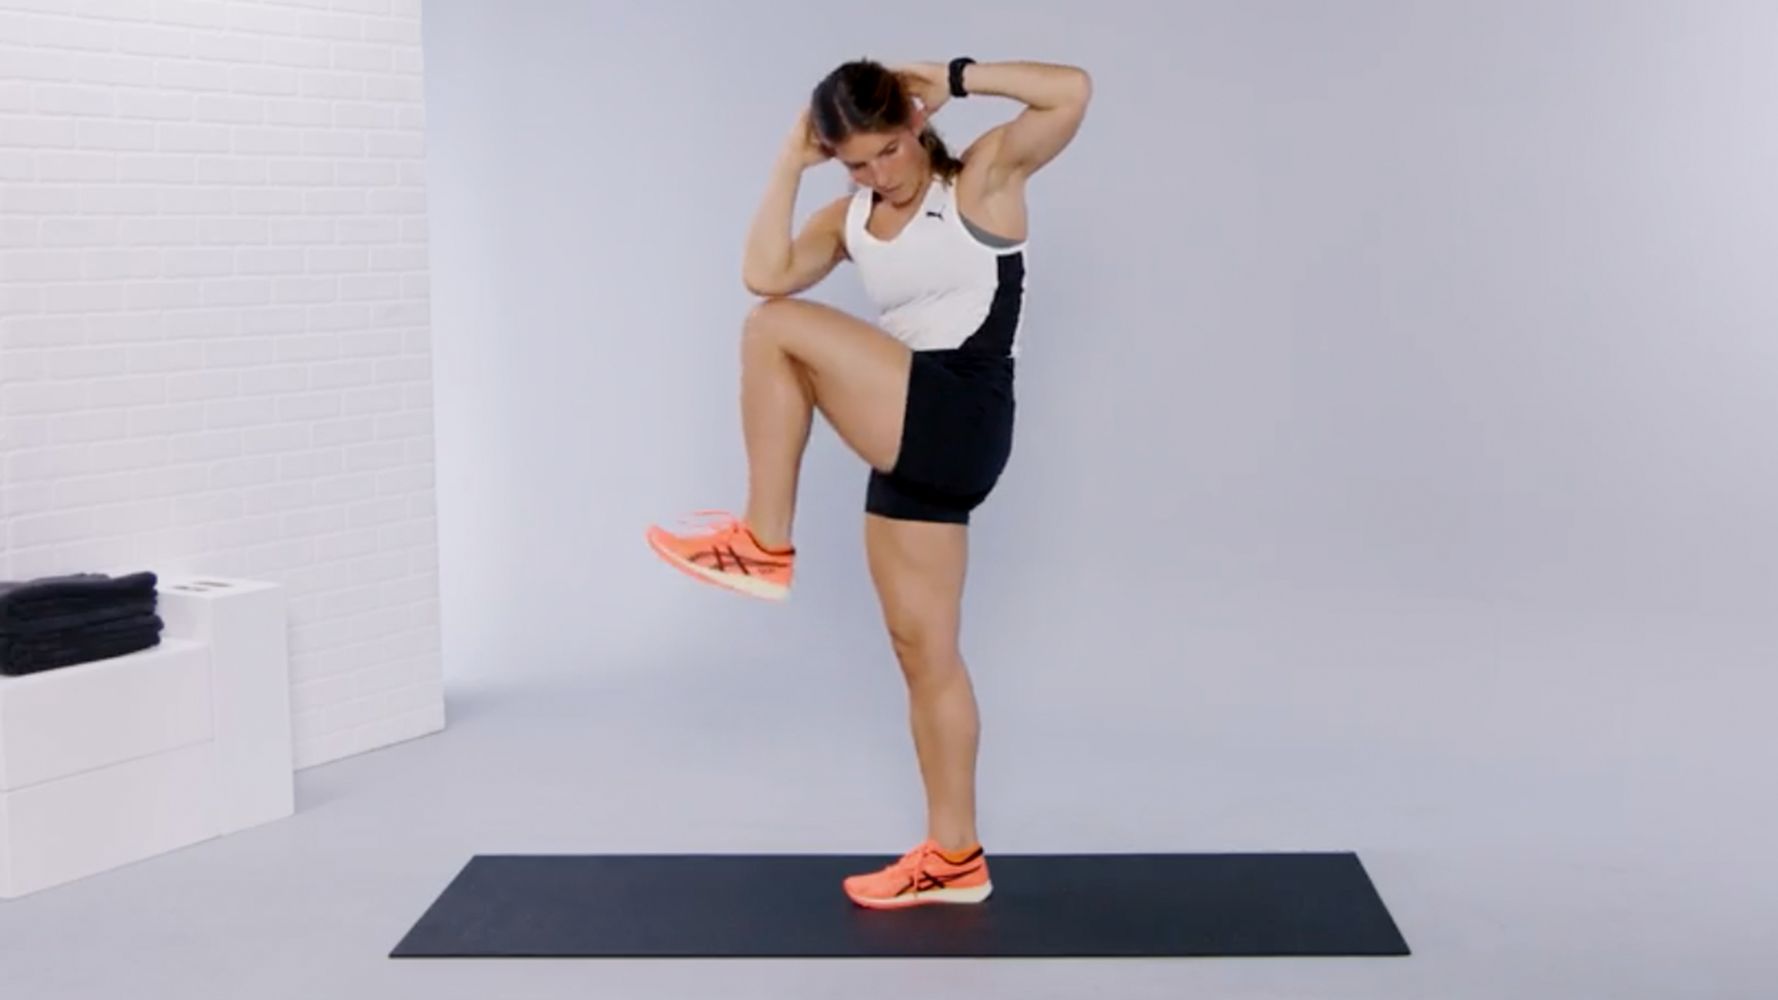 A Slider Workout for Full-Body Strength and Stability